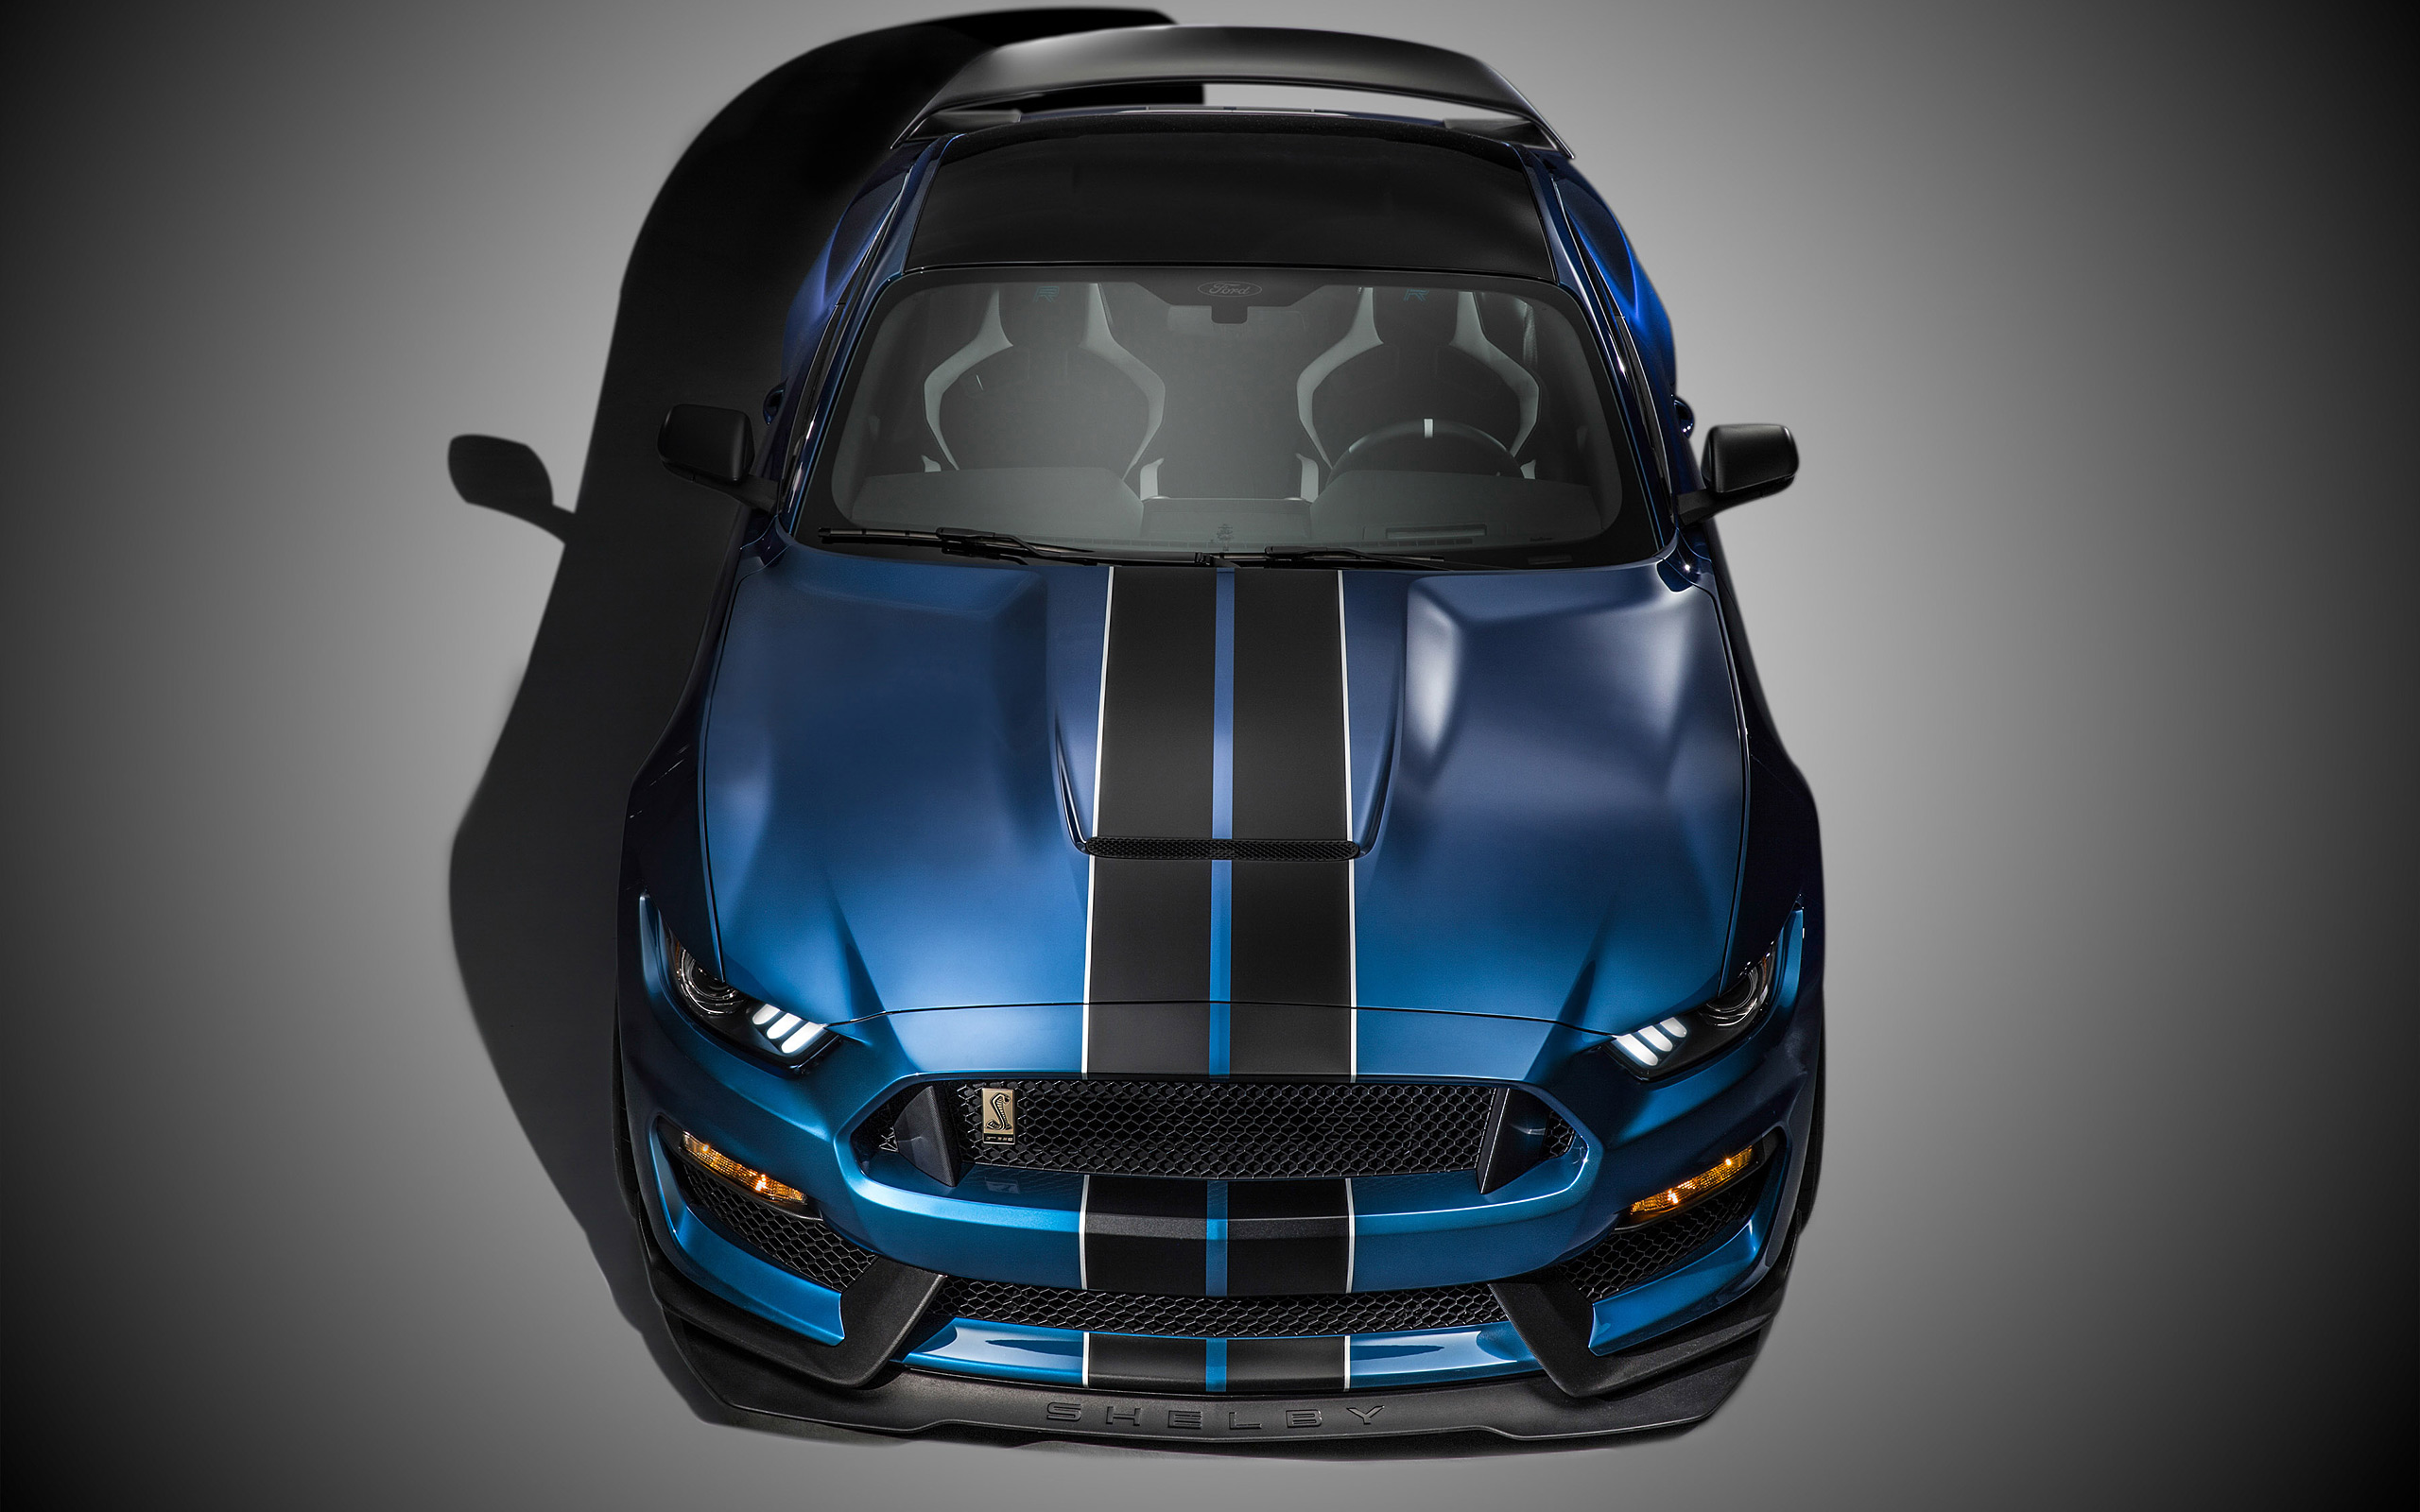  2016 Ford Shelby Mustang GT350R Wallpaper.